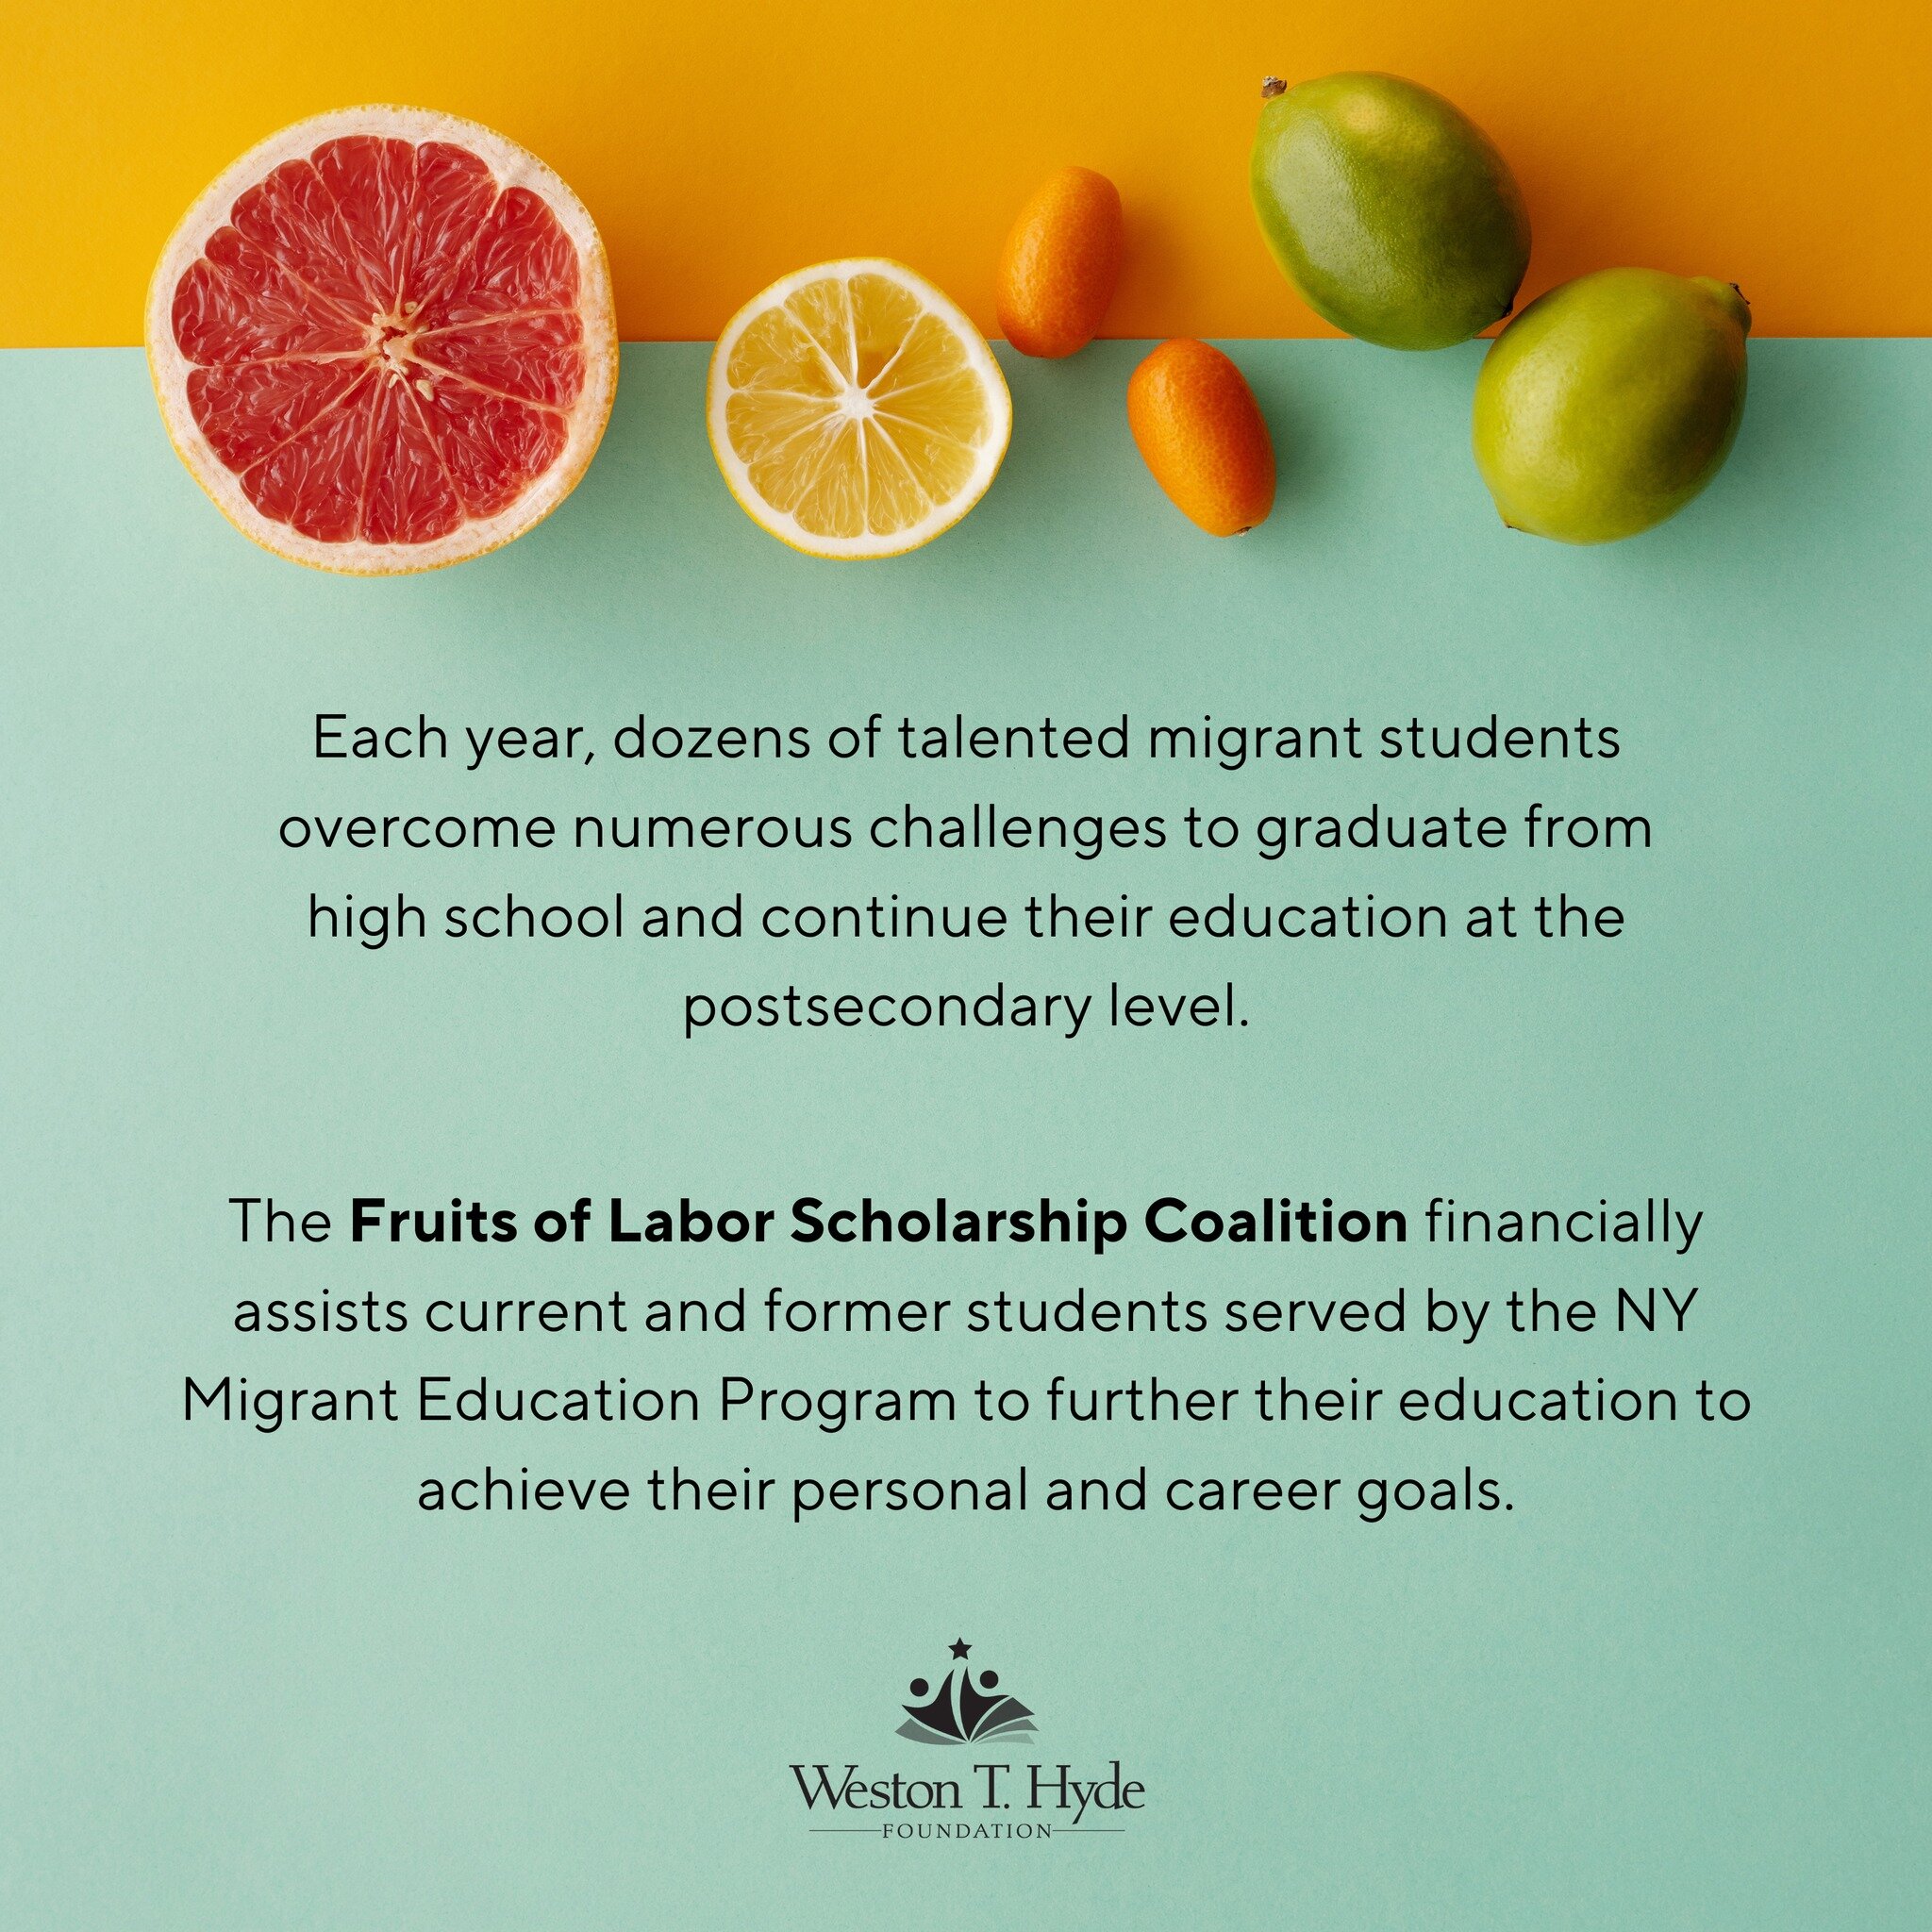 FLSC&rsquo;s vision is that students and parents served by the NYS Migrant Education Program System will have the financial resources necessary to pursue further education and achieve their dreams. 🍊🌟

#OswegoNY #OswegoCounty #EducationMatters #Aca